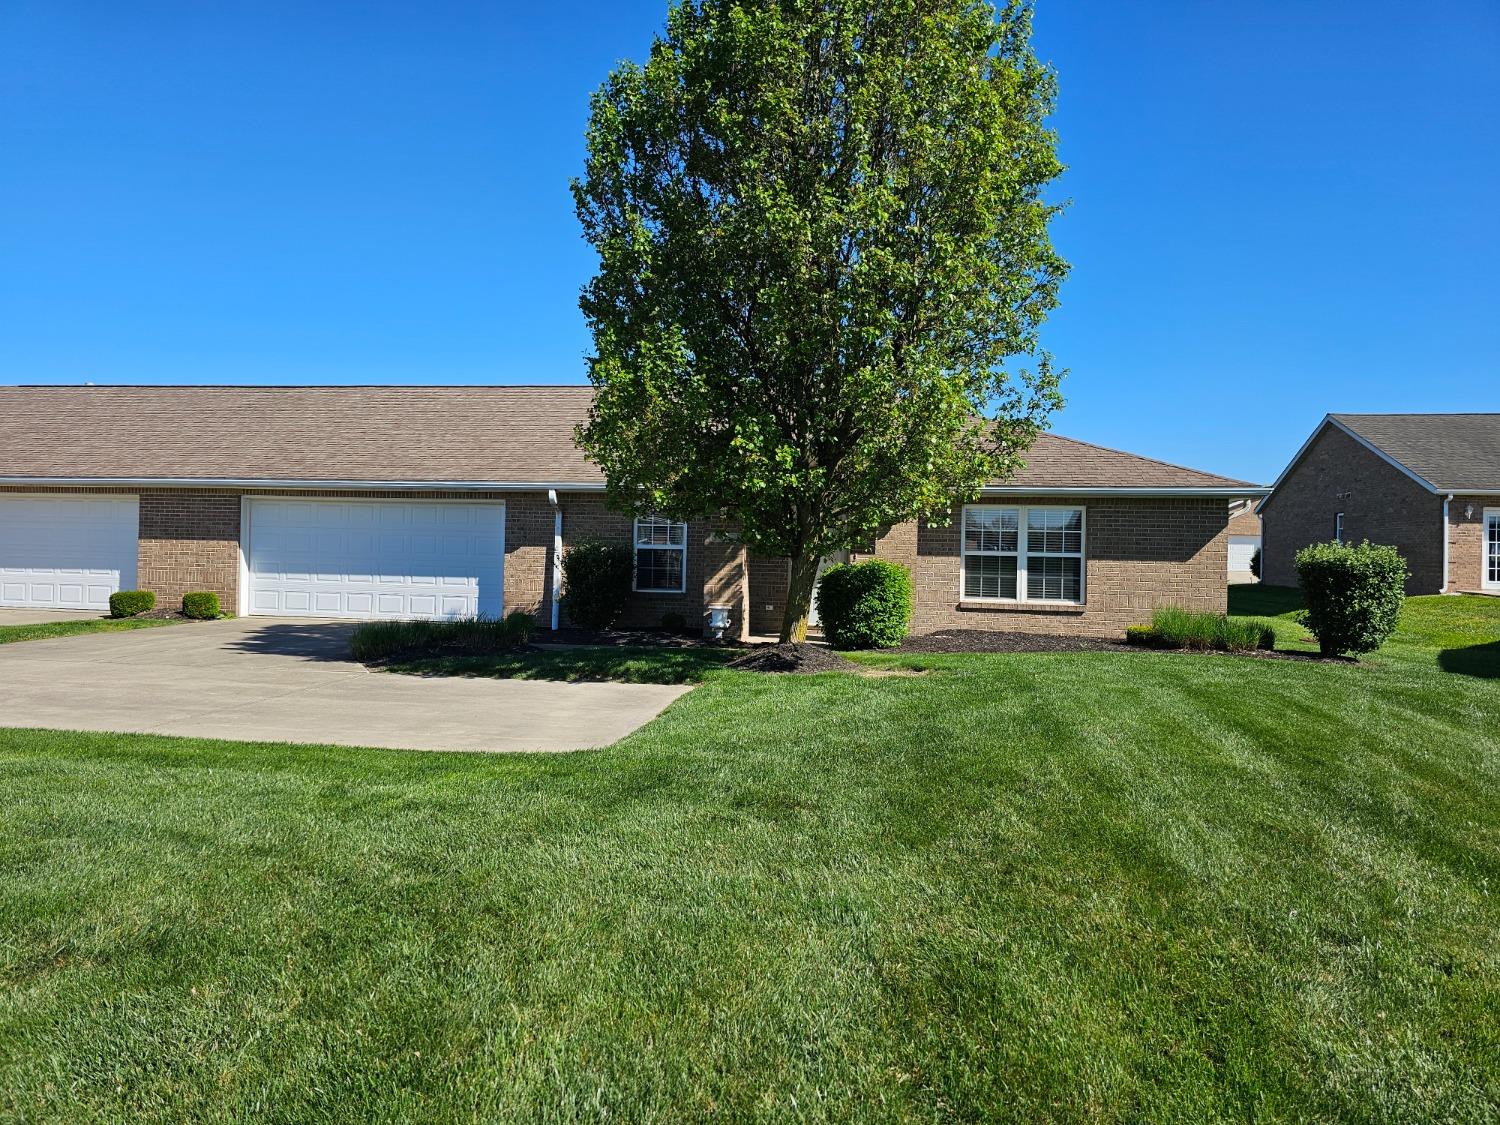 super sized ranch near 1800 sq. ft. in this conveniently located Batesville 55+ community